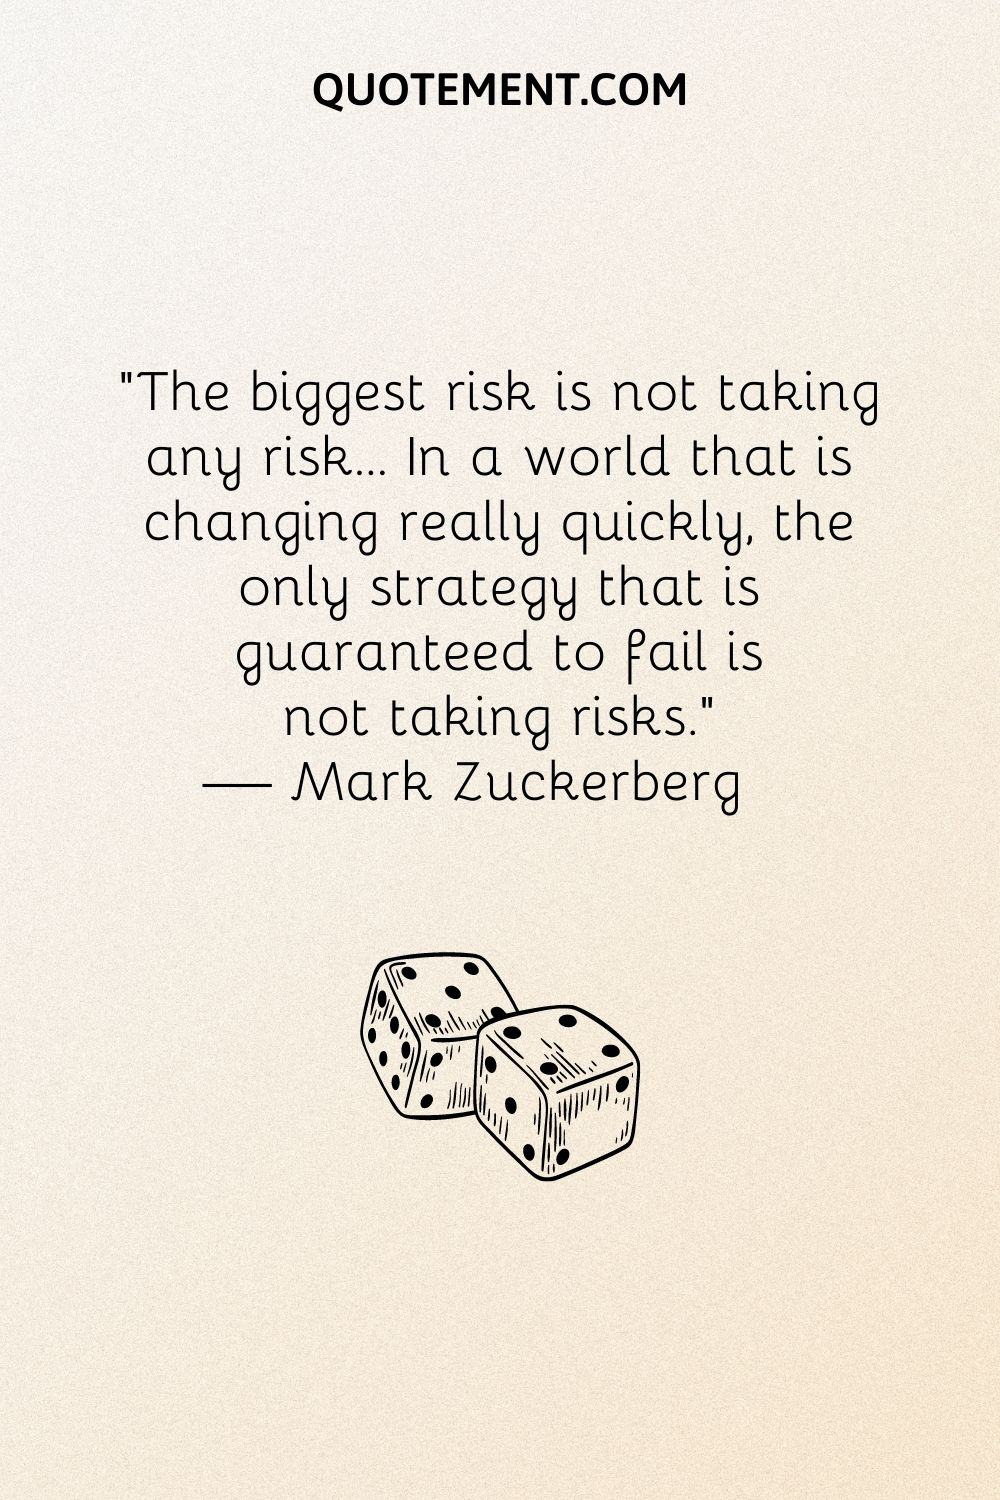 The biggest risk is not taking any risk